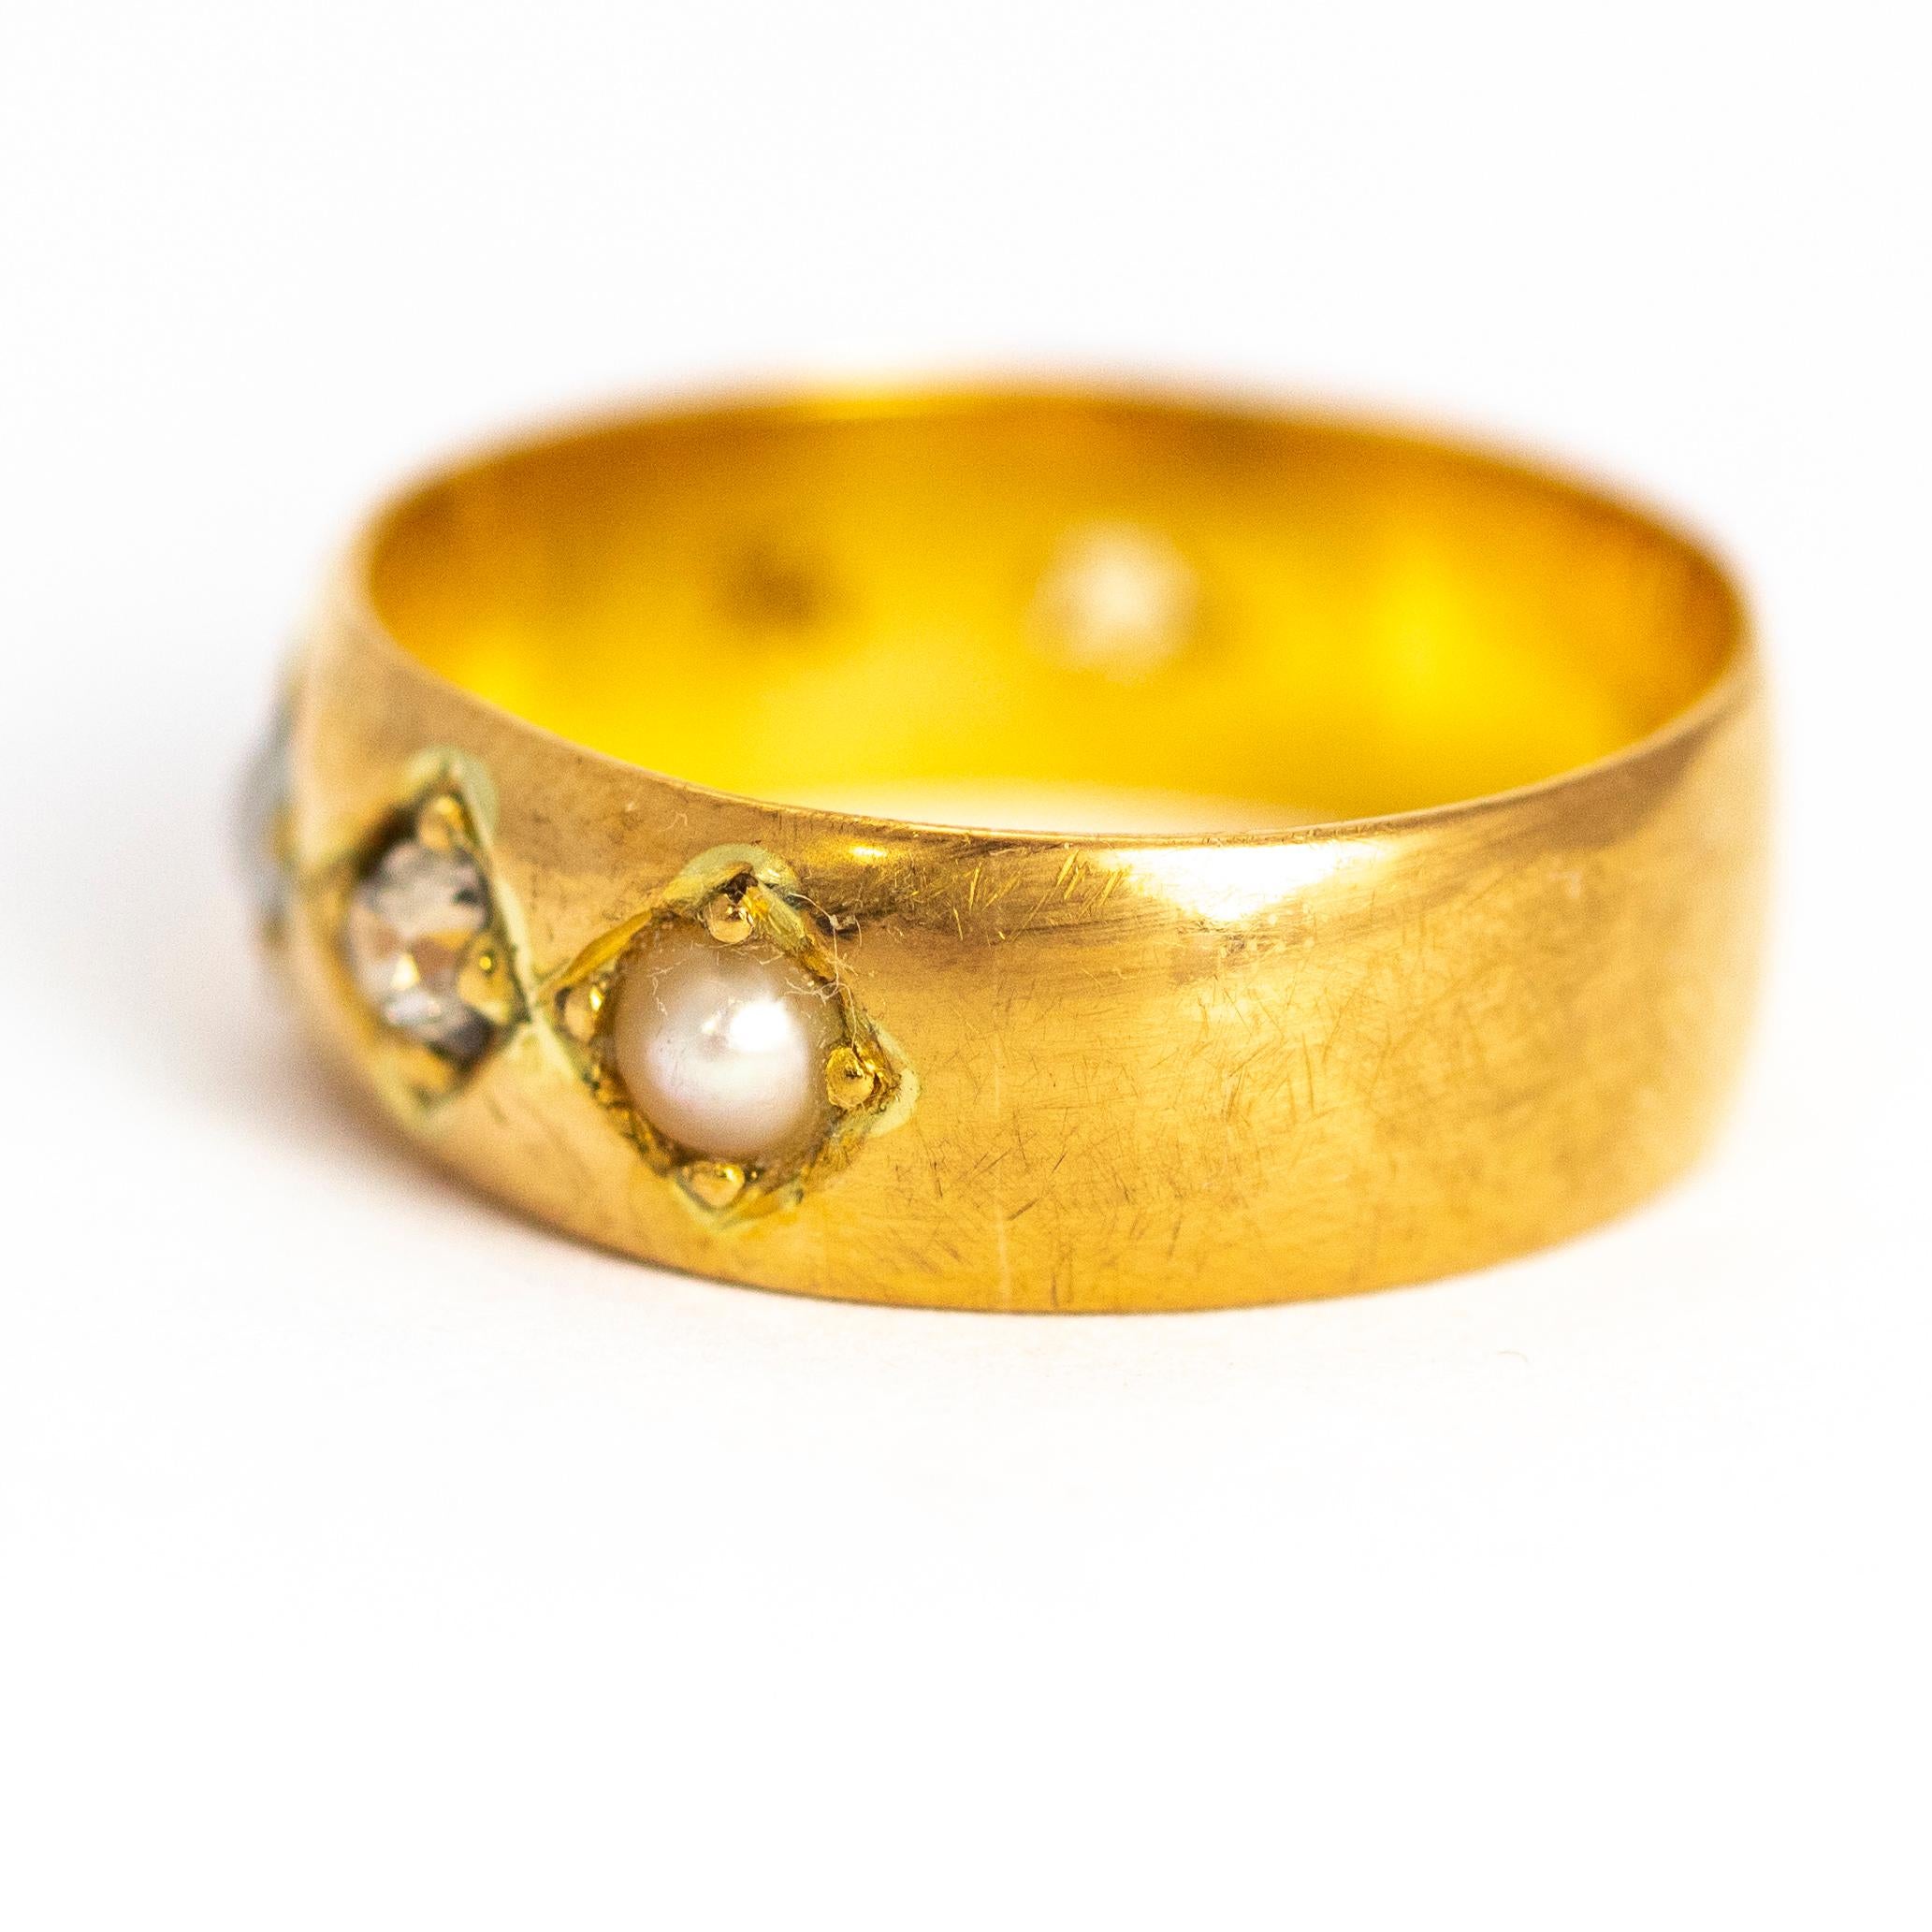 This chunky 22ct gold band holds a lovely 20pt diamond that sits in between two sweet pearls. This ring could make a decorative wedding band or a lovely everyday wear. Made in Birmingham, England.

Ring Size: R or 8 1/2